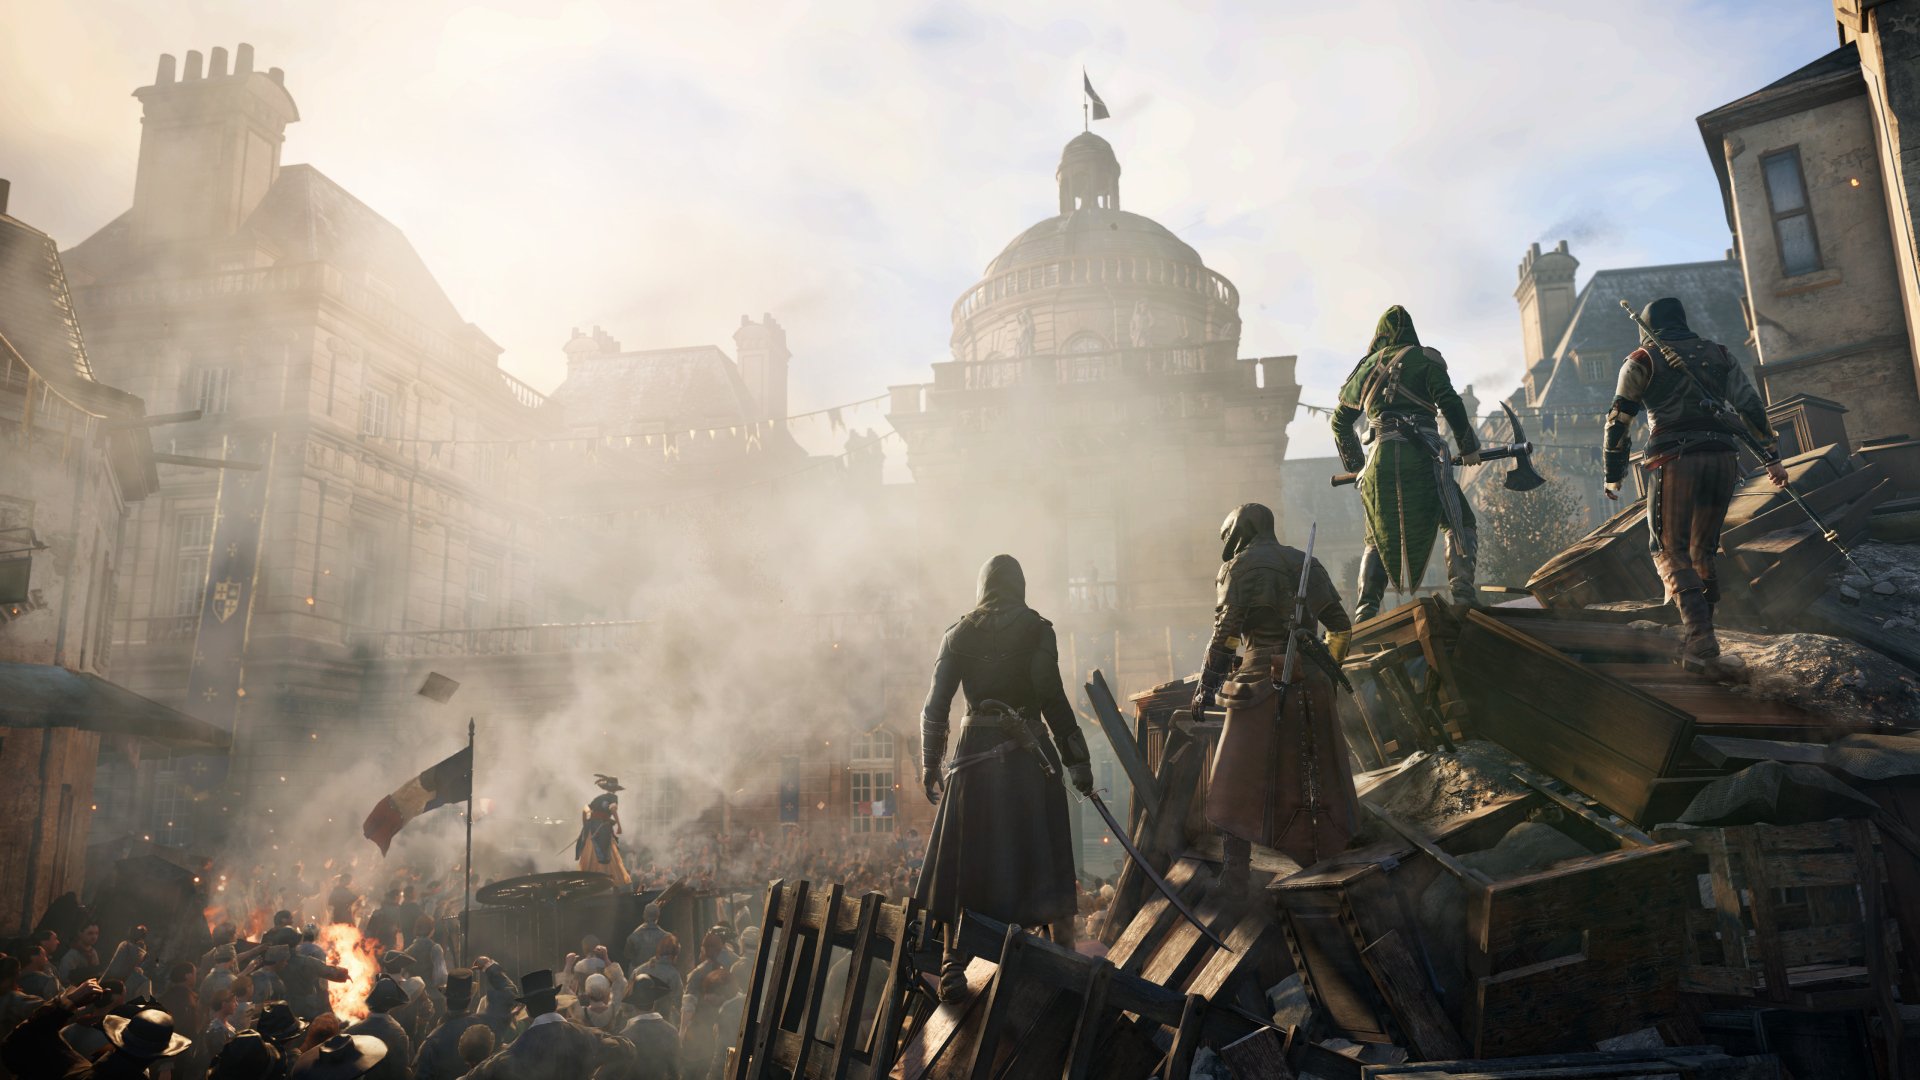 HD desktop wallpaper featuring a dynamic scene from Assassin's Creed: Unity with characters in a smoky, historic cityscape preparing for battle.